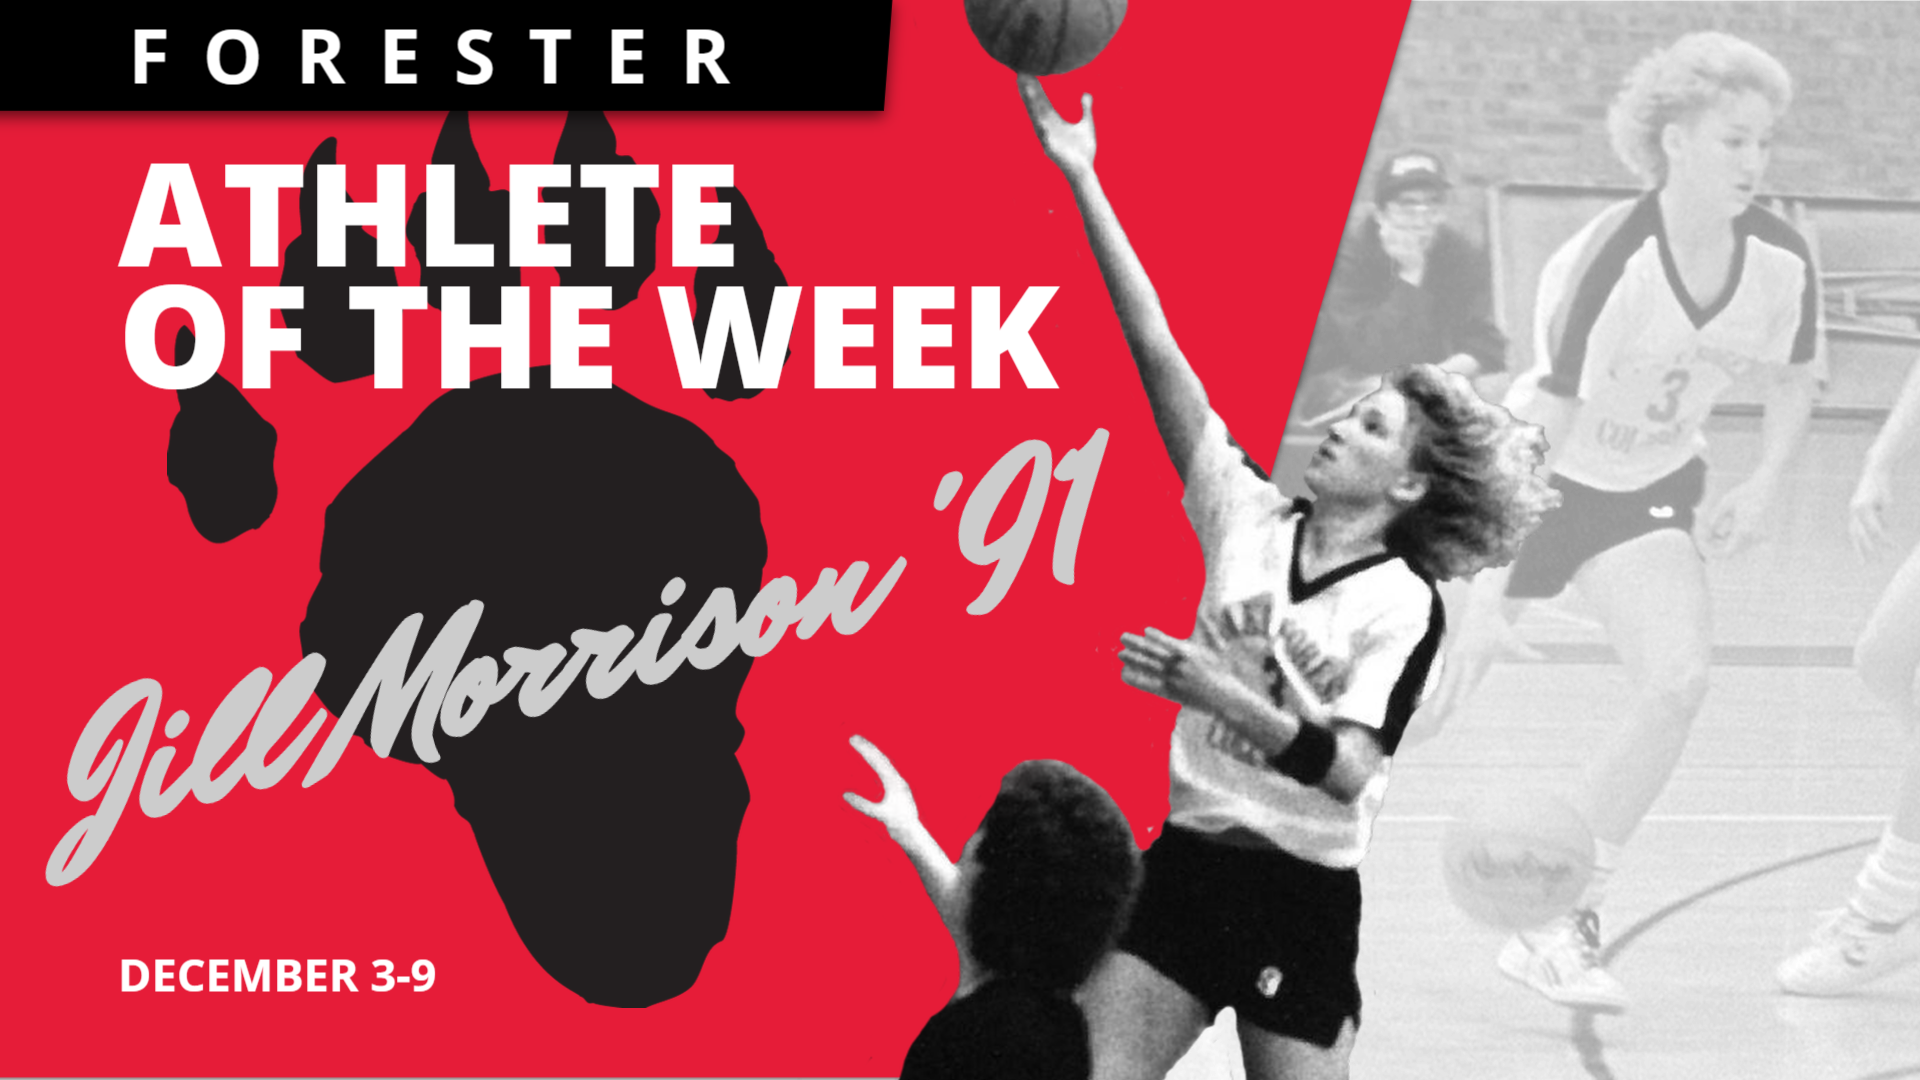 Jill Morrison '91 Named Forester Athlete of the Week